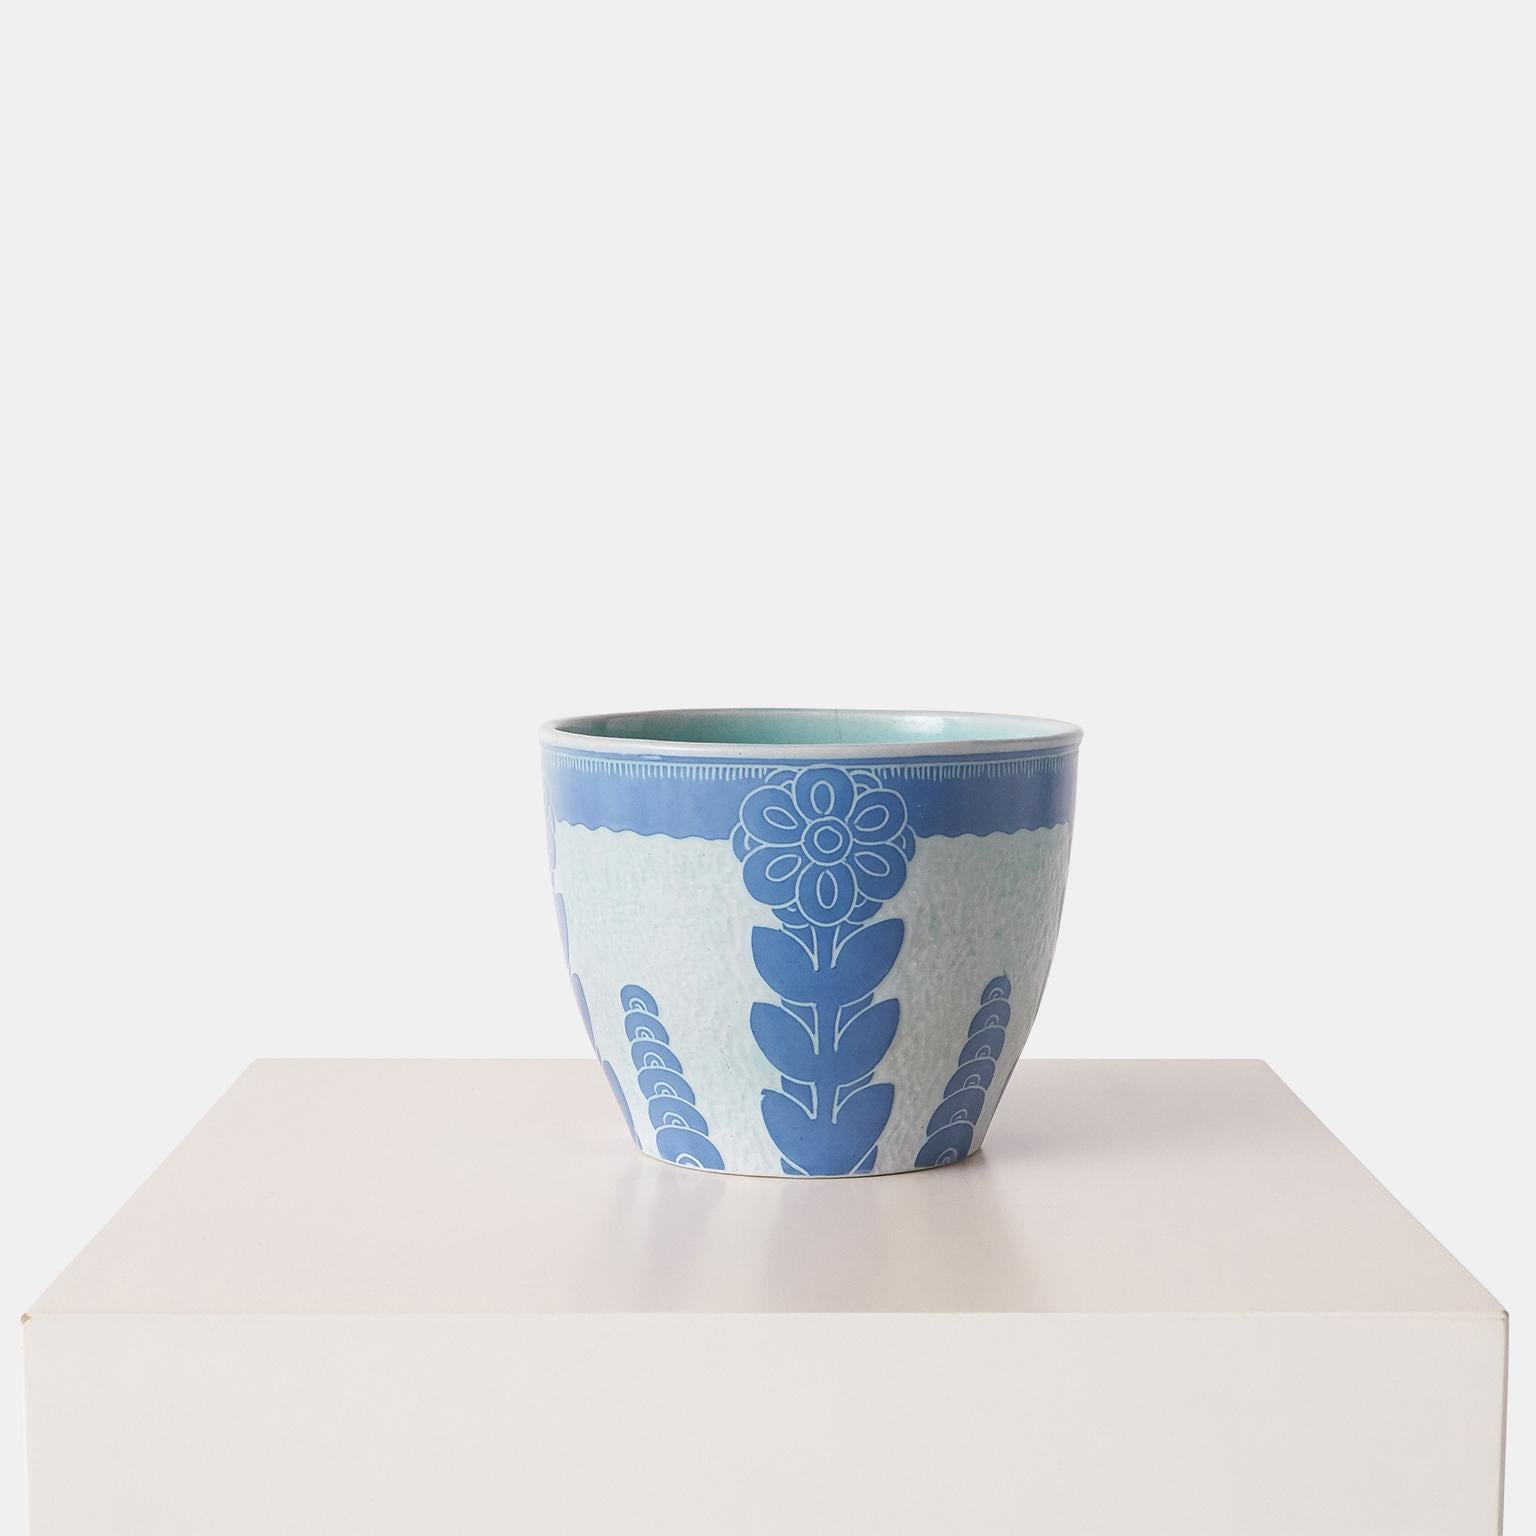 A handmade blue pot by Josef Ekberg for Gustavsberg. Each piece is unique and decorated with the Sgrafitto technique that was developed by Ekberg himself.

Signed : Gustavsberg, 1919 JE